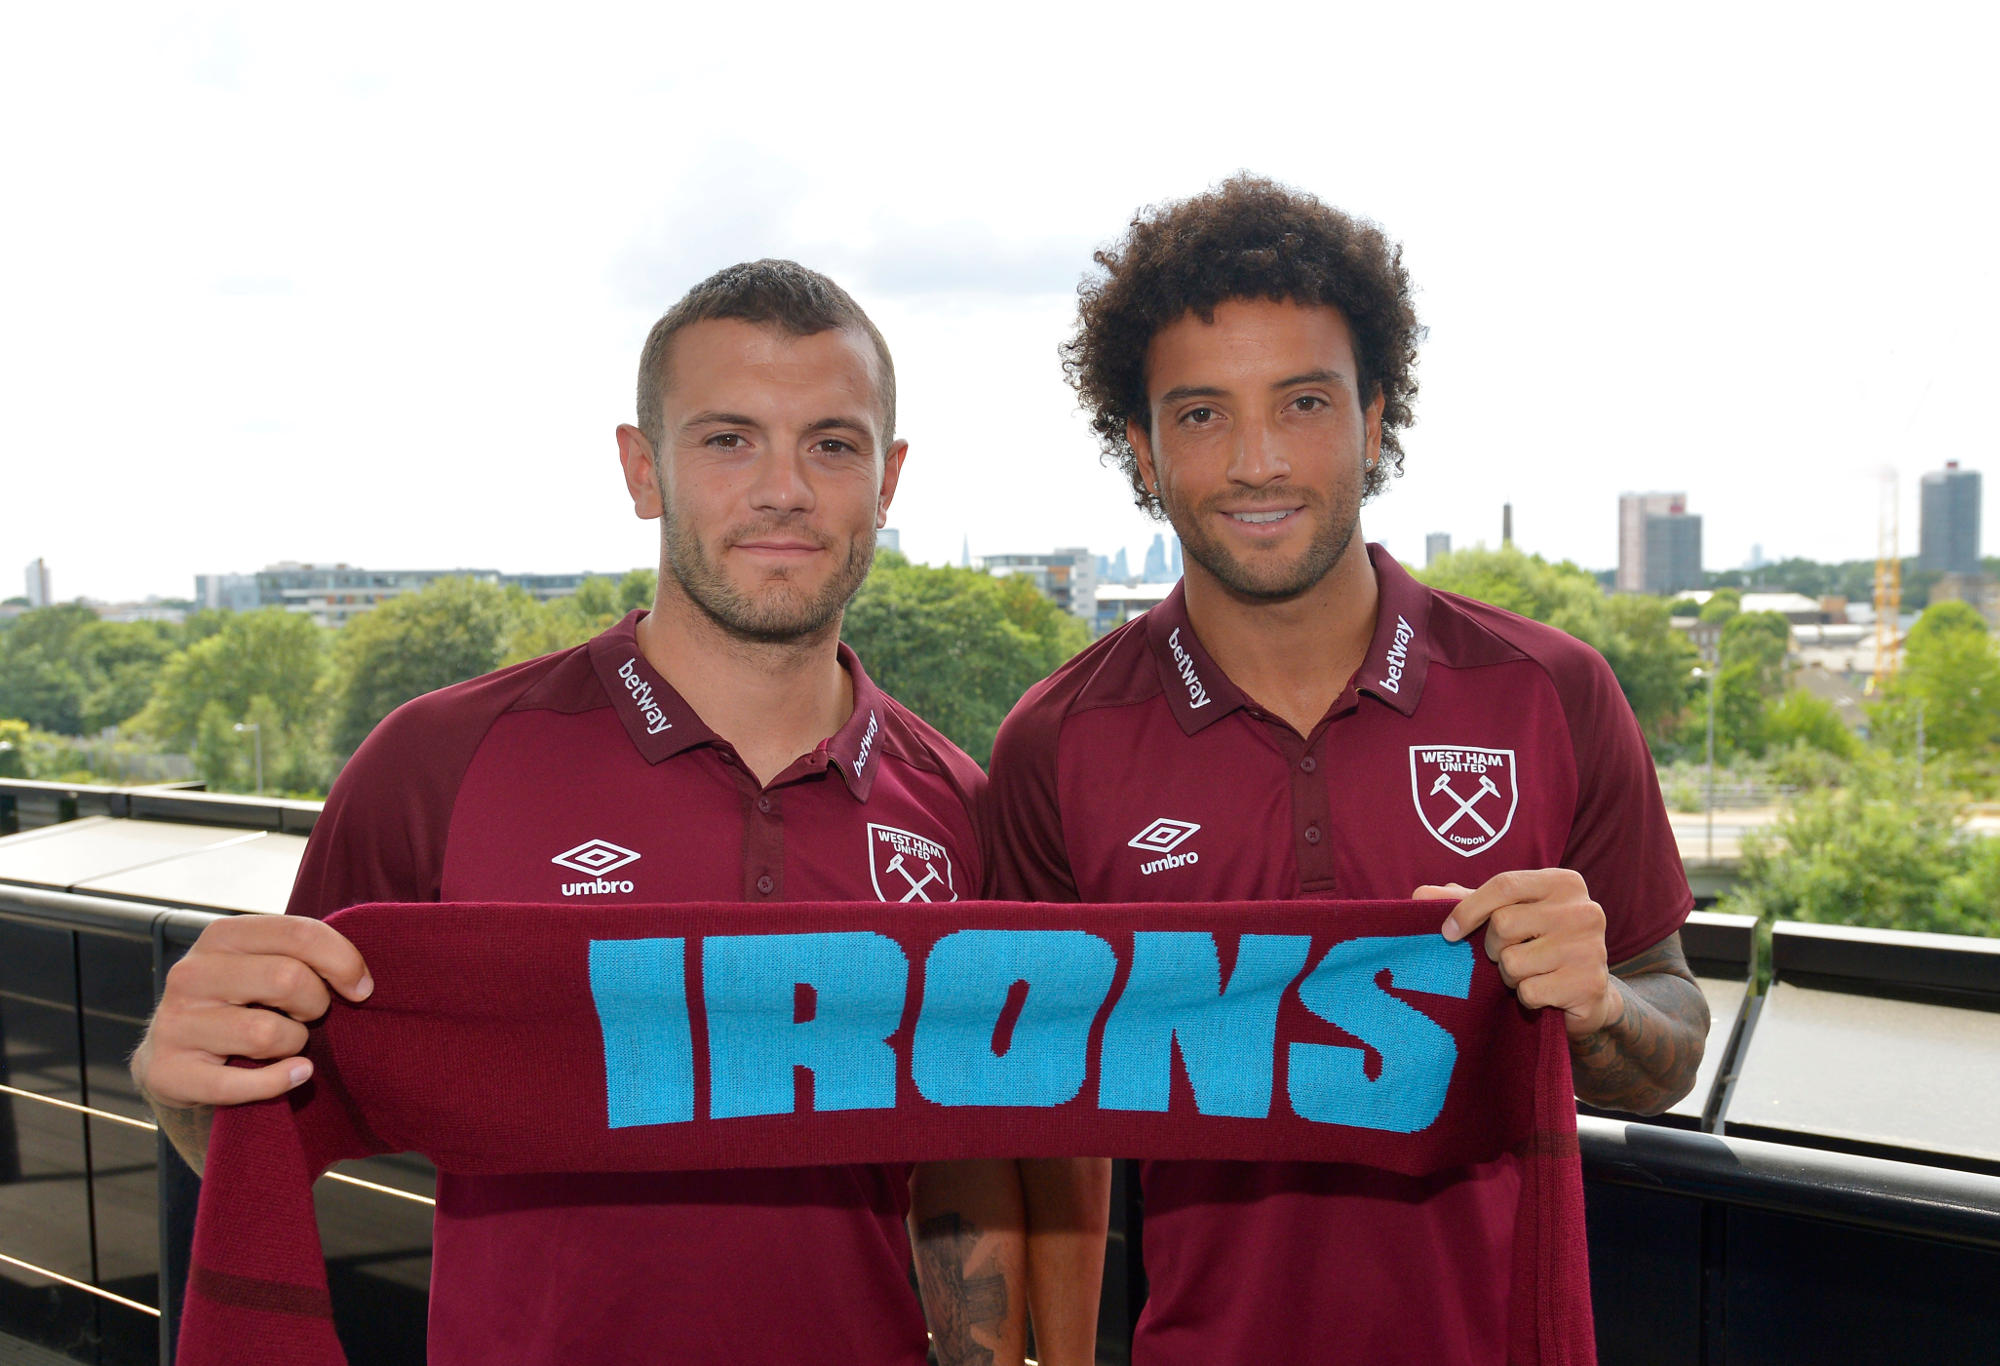 Jack Wilshere and Felipe Anderson at a press conference following their signing with West Ham United.